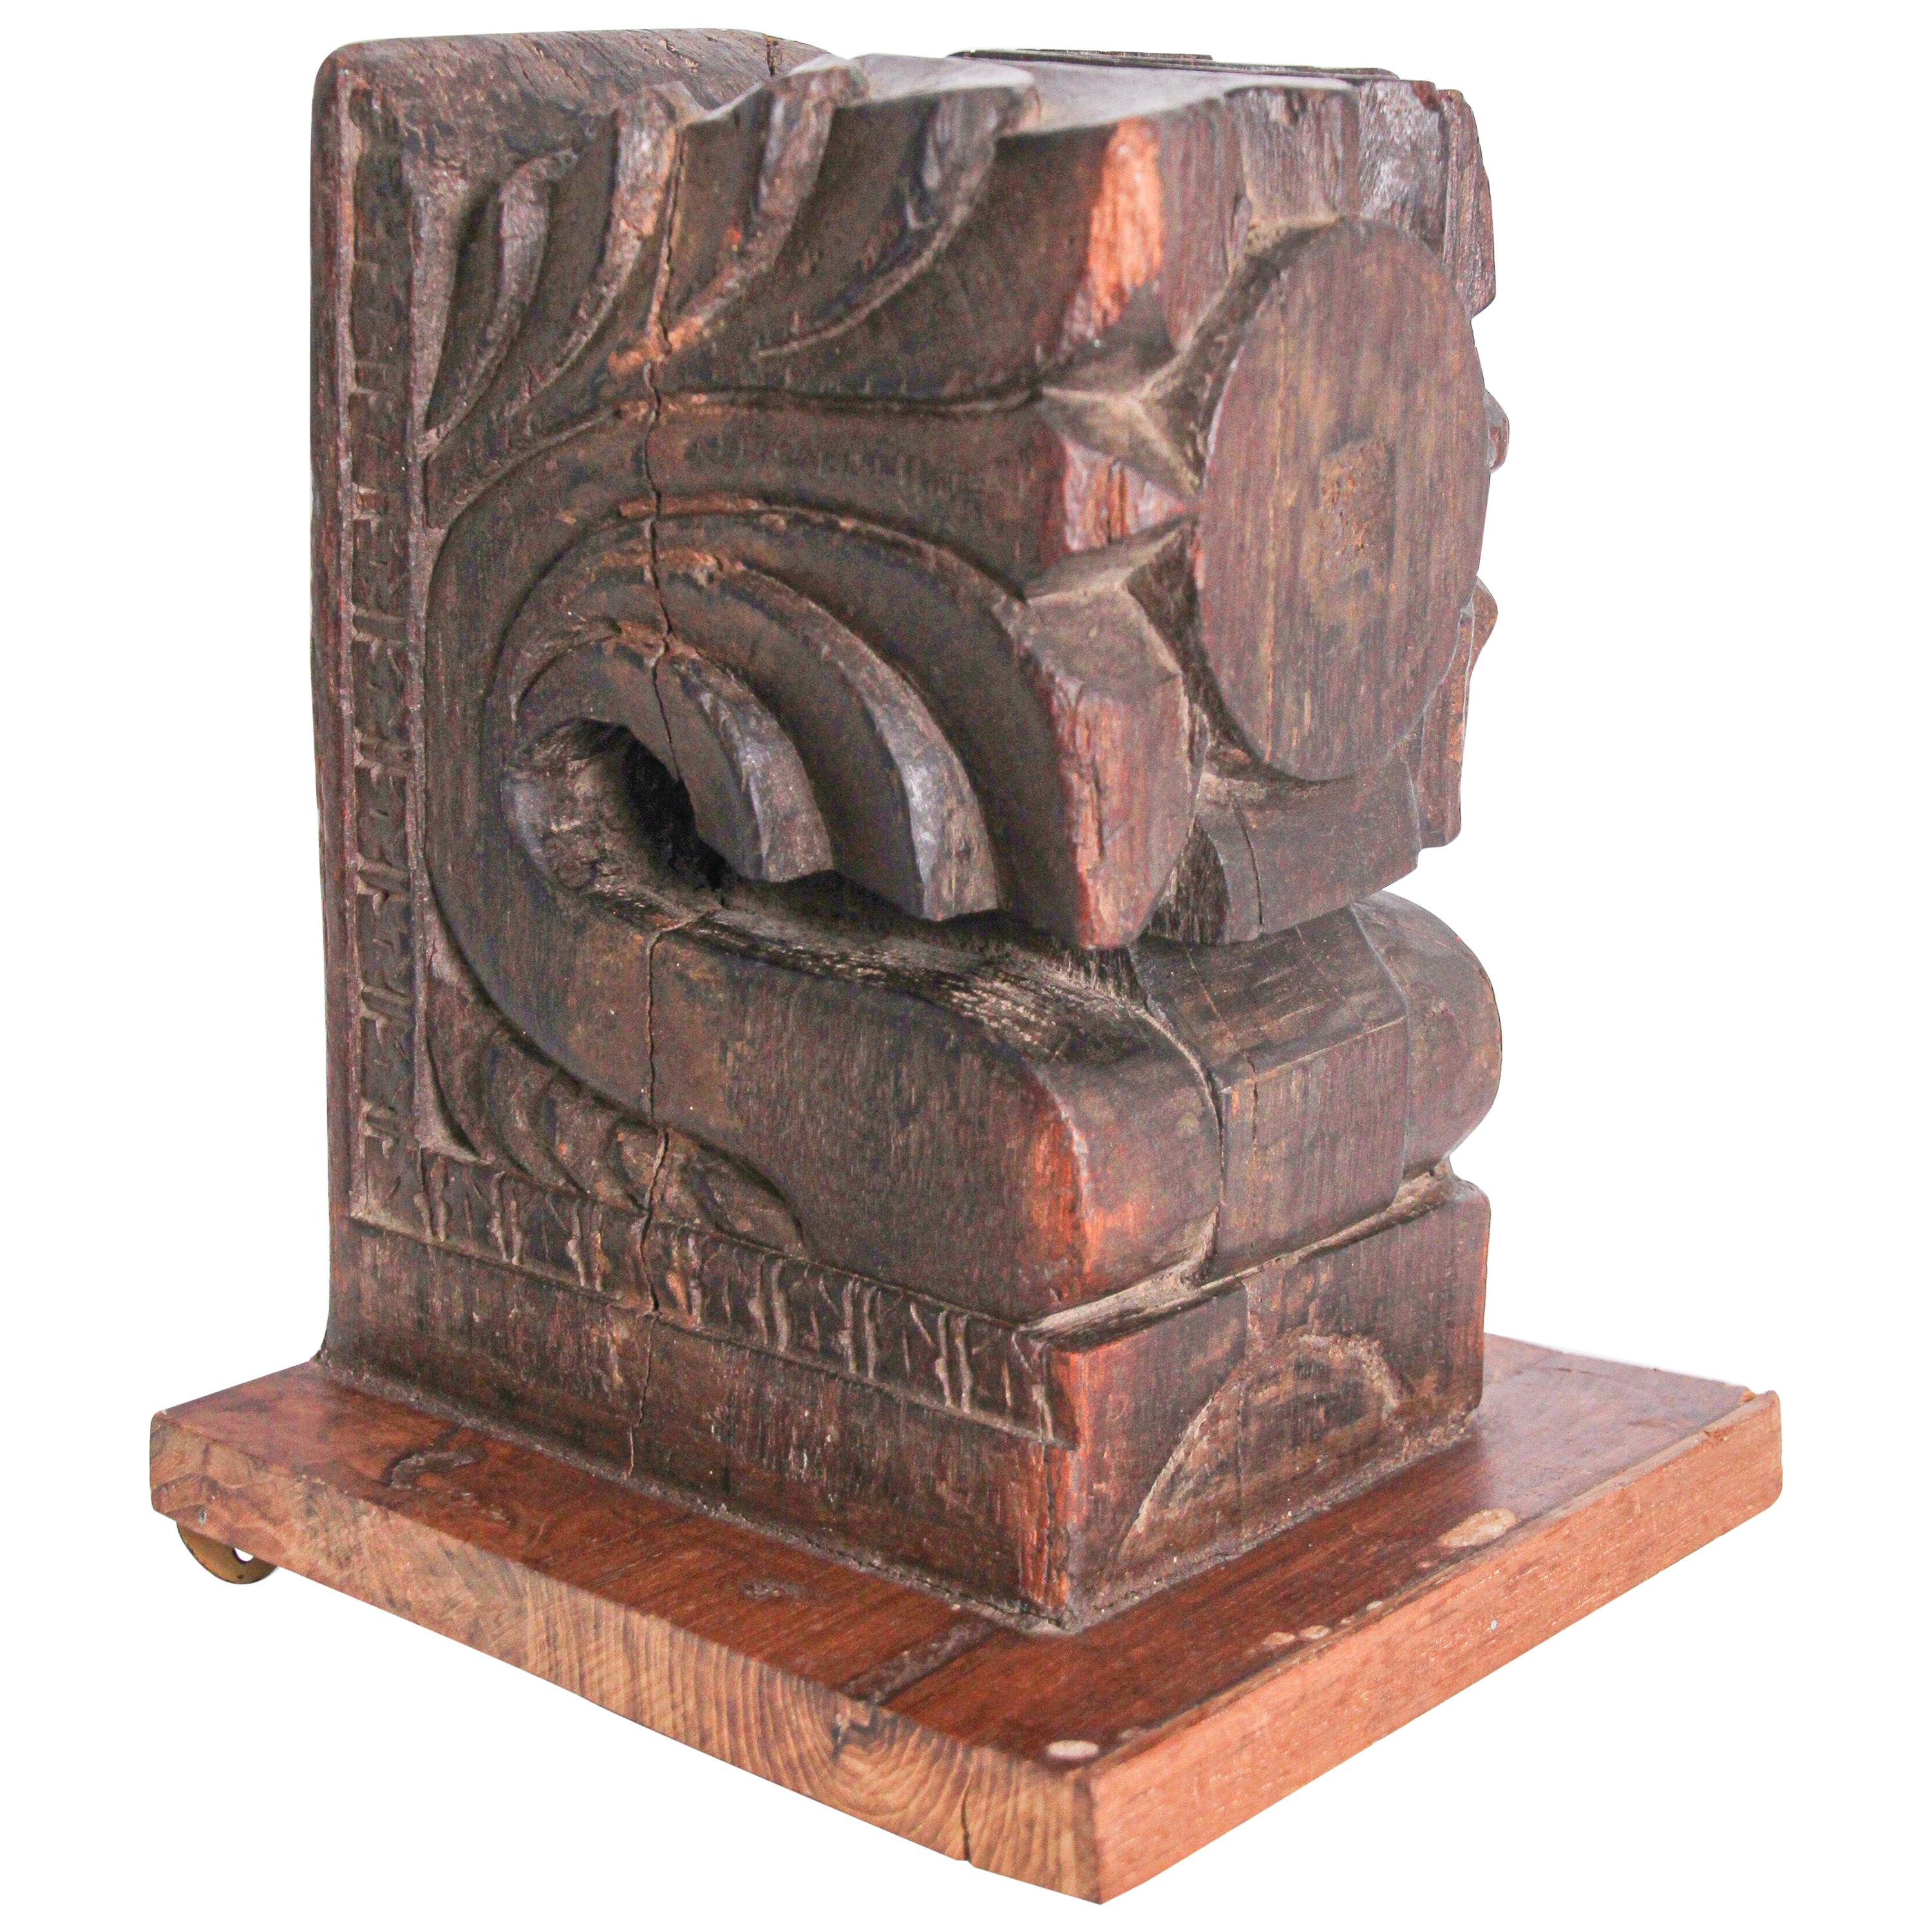 Architectural Hindu Temple Carved Wood Fragment from India